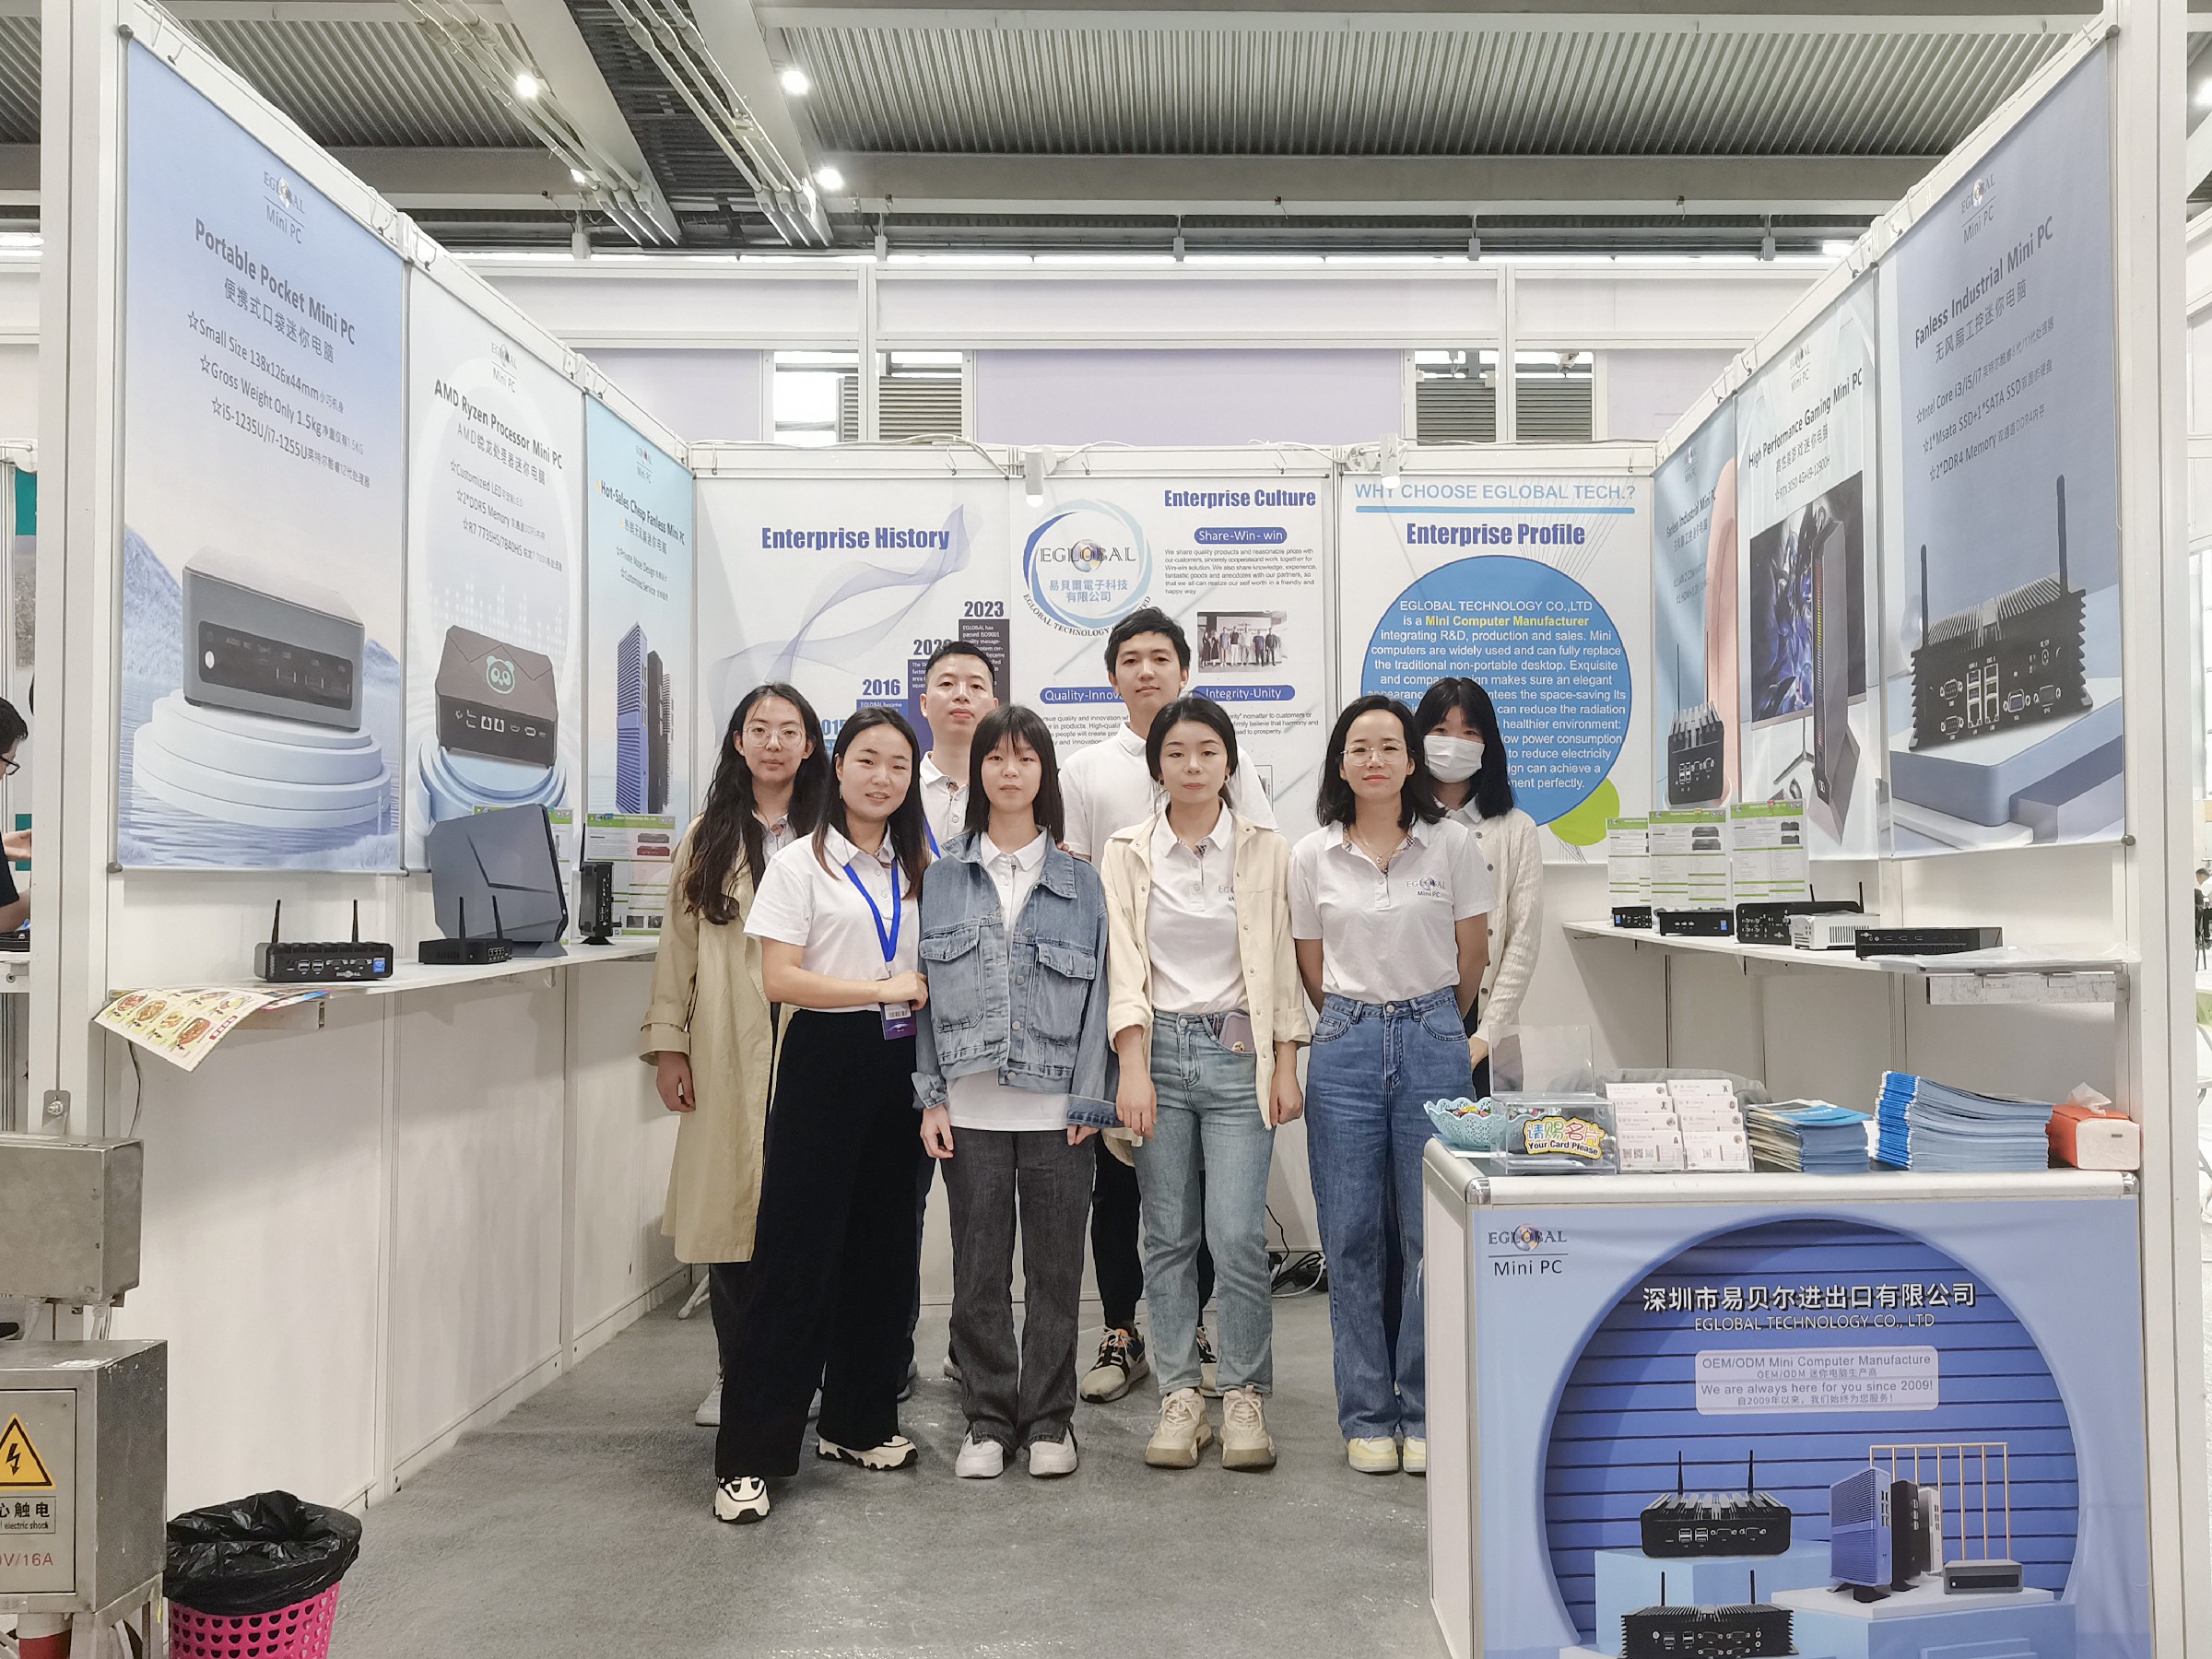 EGSMTPC Mini PC Manufacturer Attends 12.12 Foreign Trade Exhibition In Futian,Shenzhen(图1)